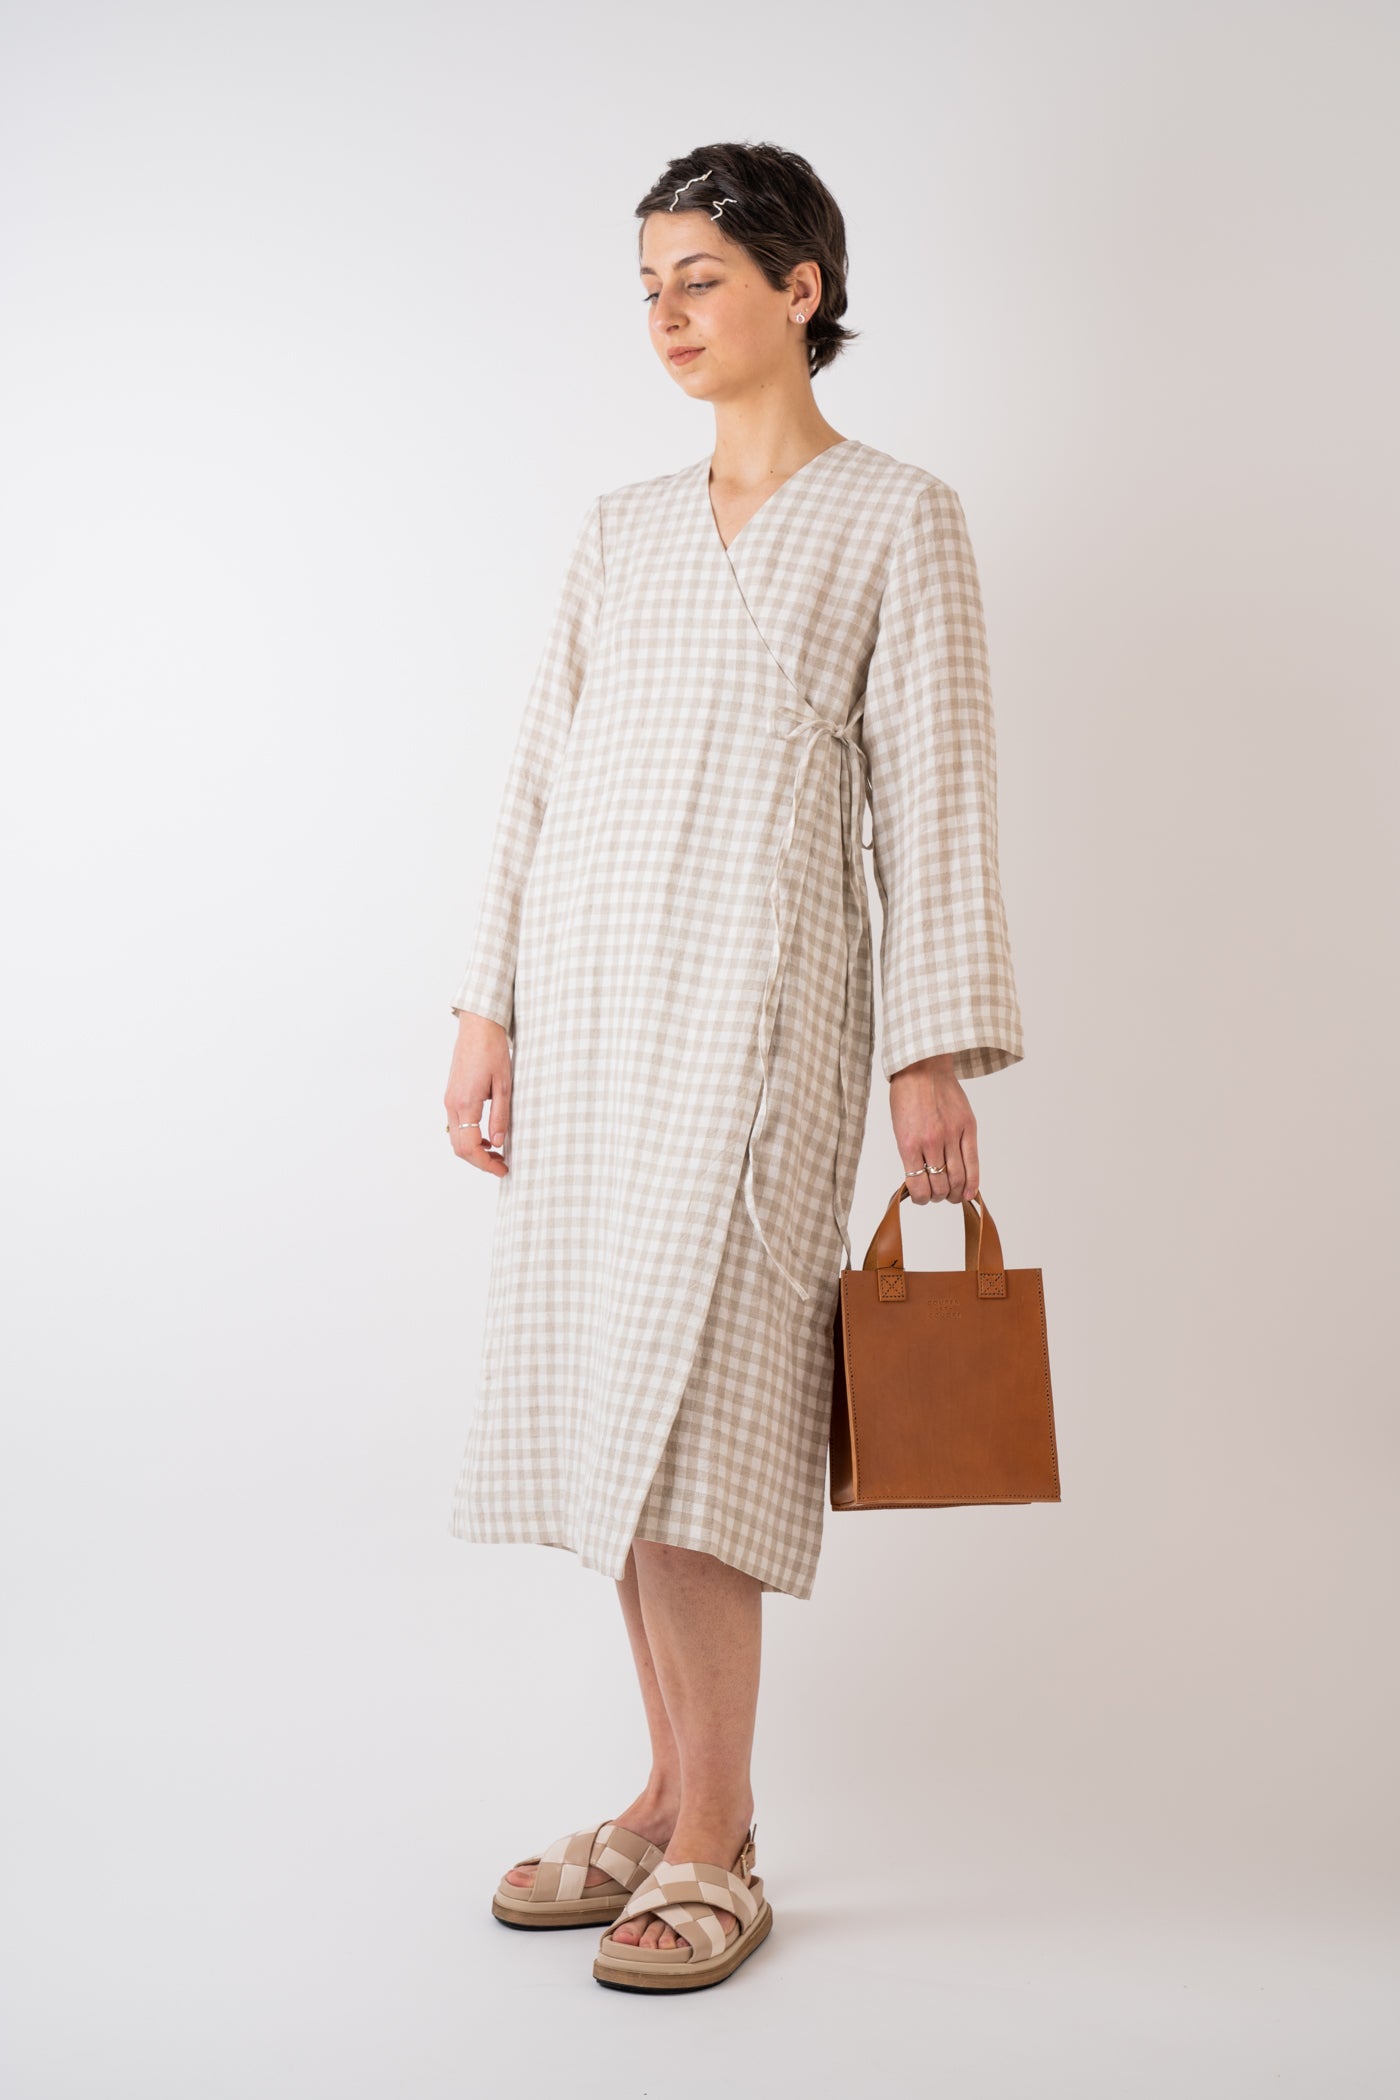 Cawley Studio 100% Irish Stripe Linen Marina Dress in Gingham handmade in London MIMMO Exclusive styled with Couper et Coudre Leather Jour Bag in Cognac handmade in Somerset